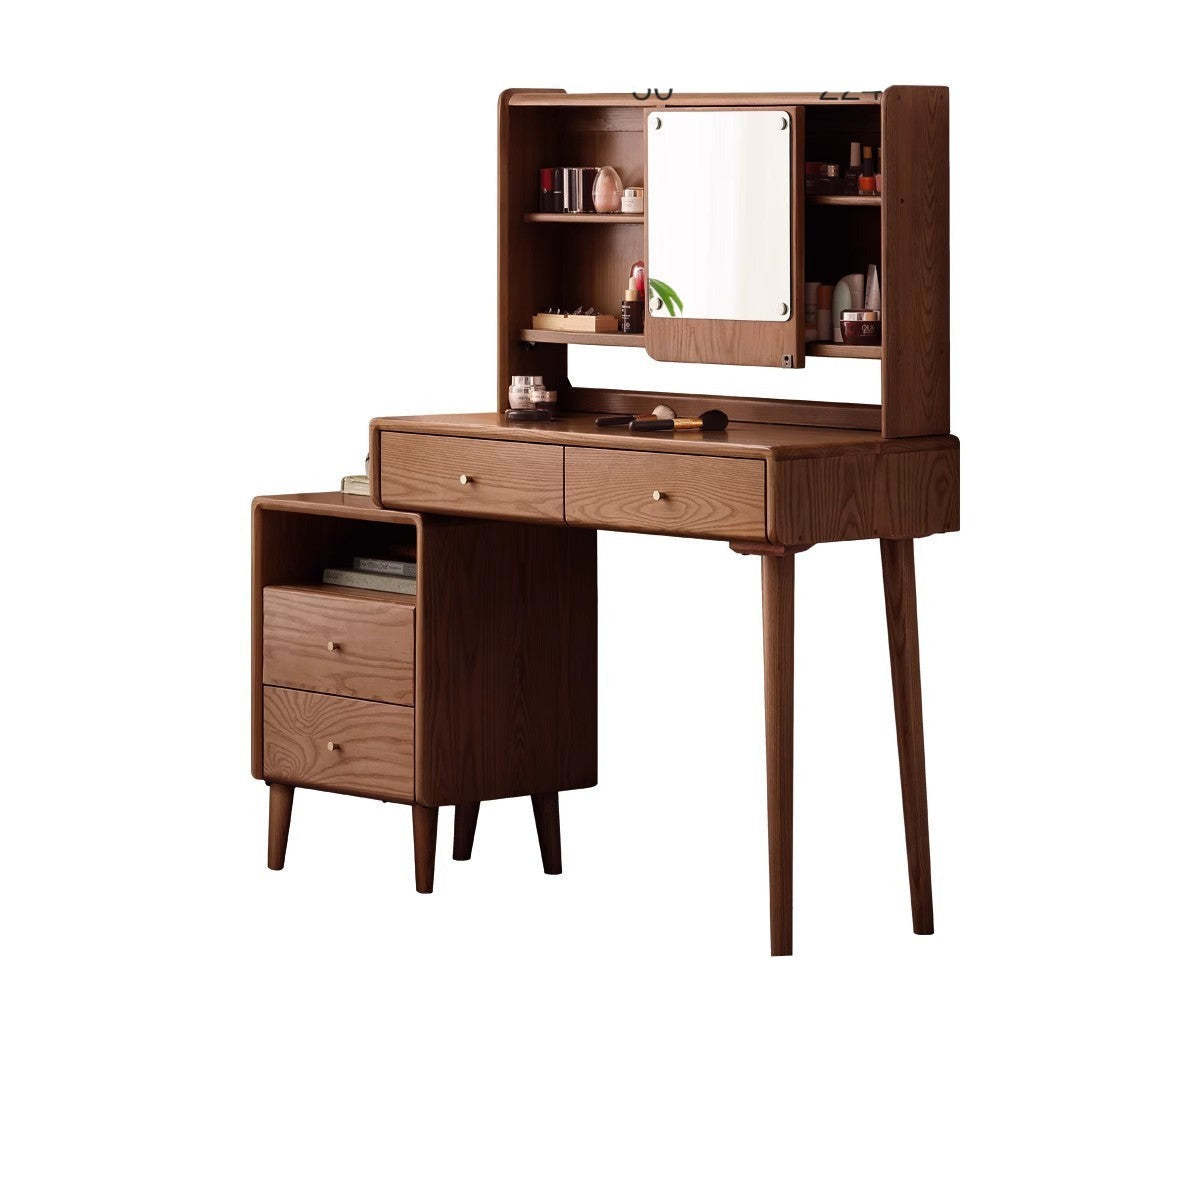 Oak Solid Wood Dressing Table with Mirror shelf & flip cover"